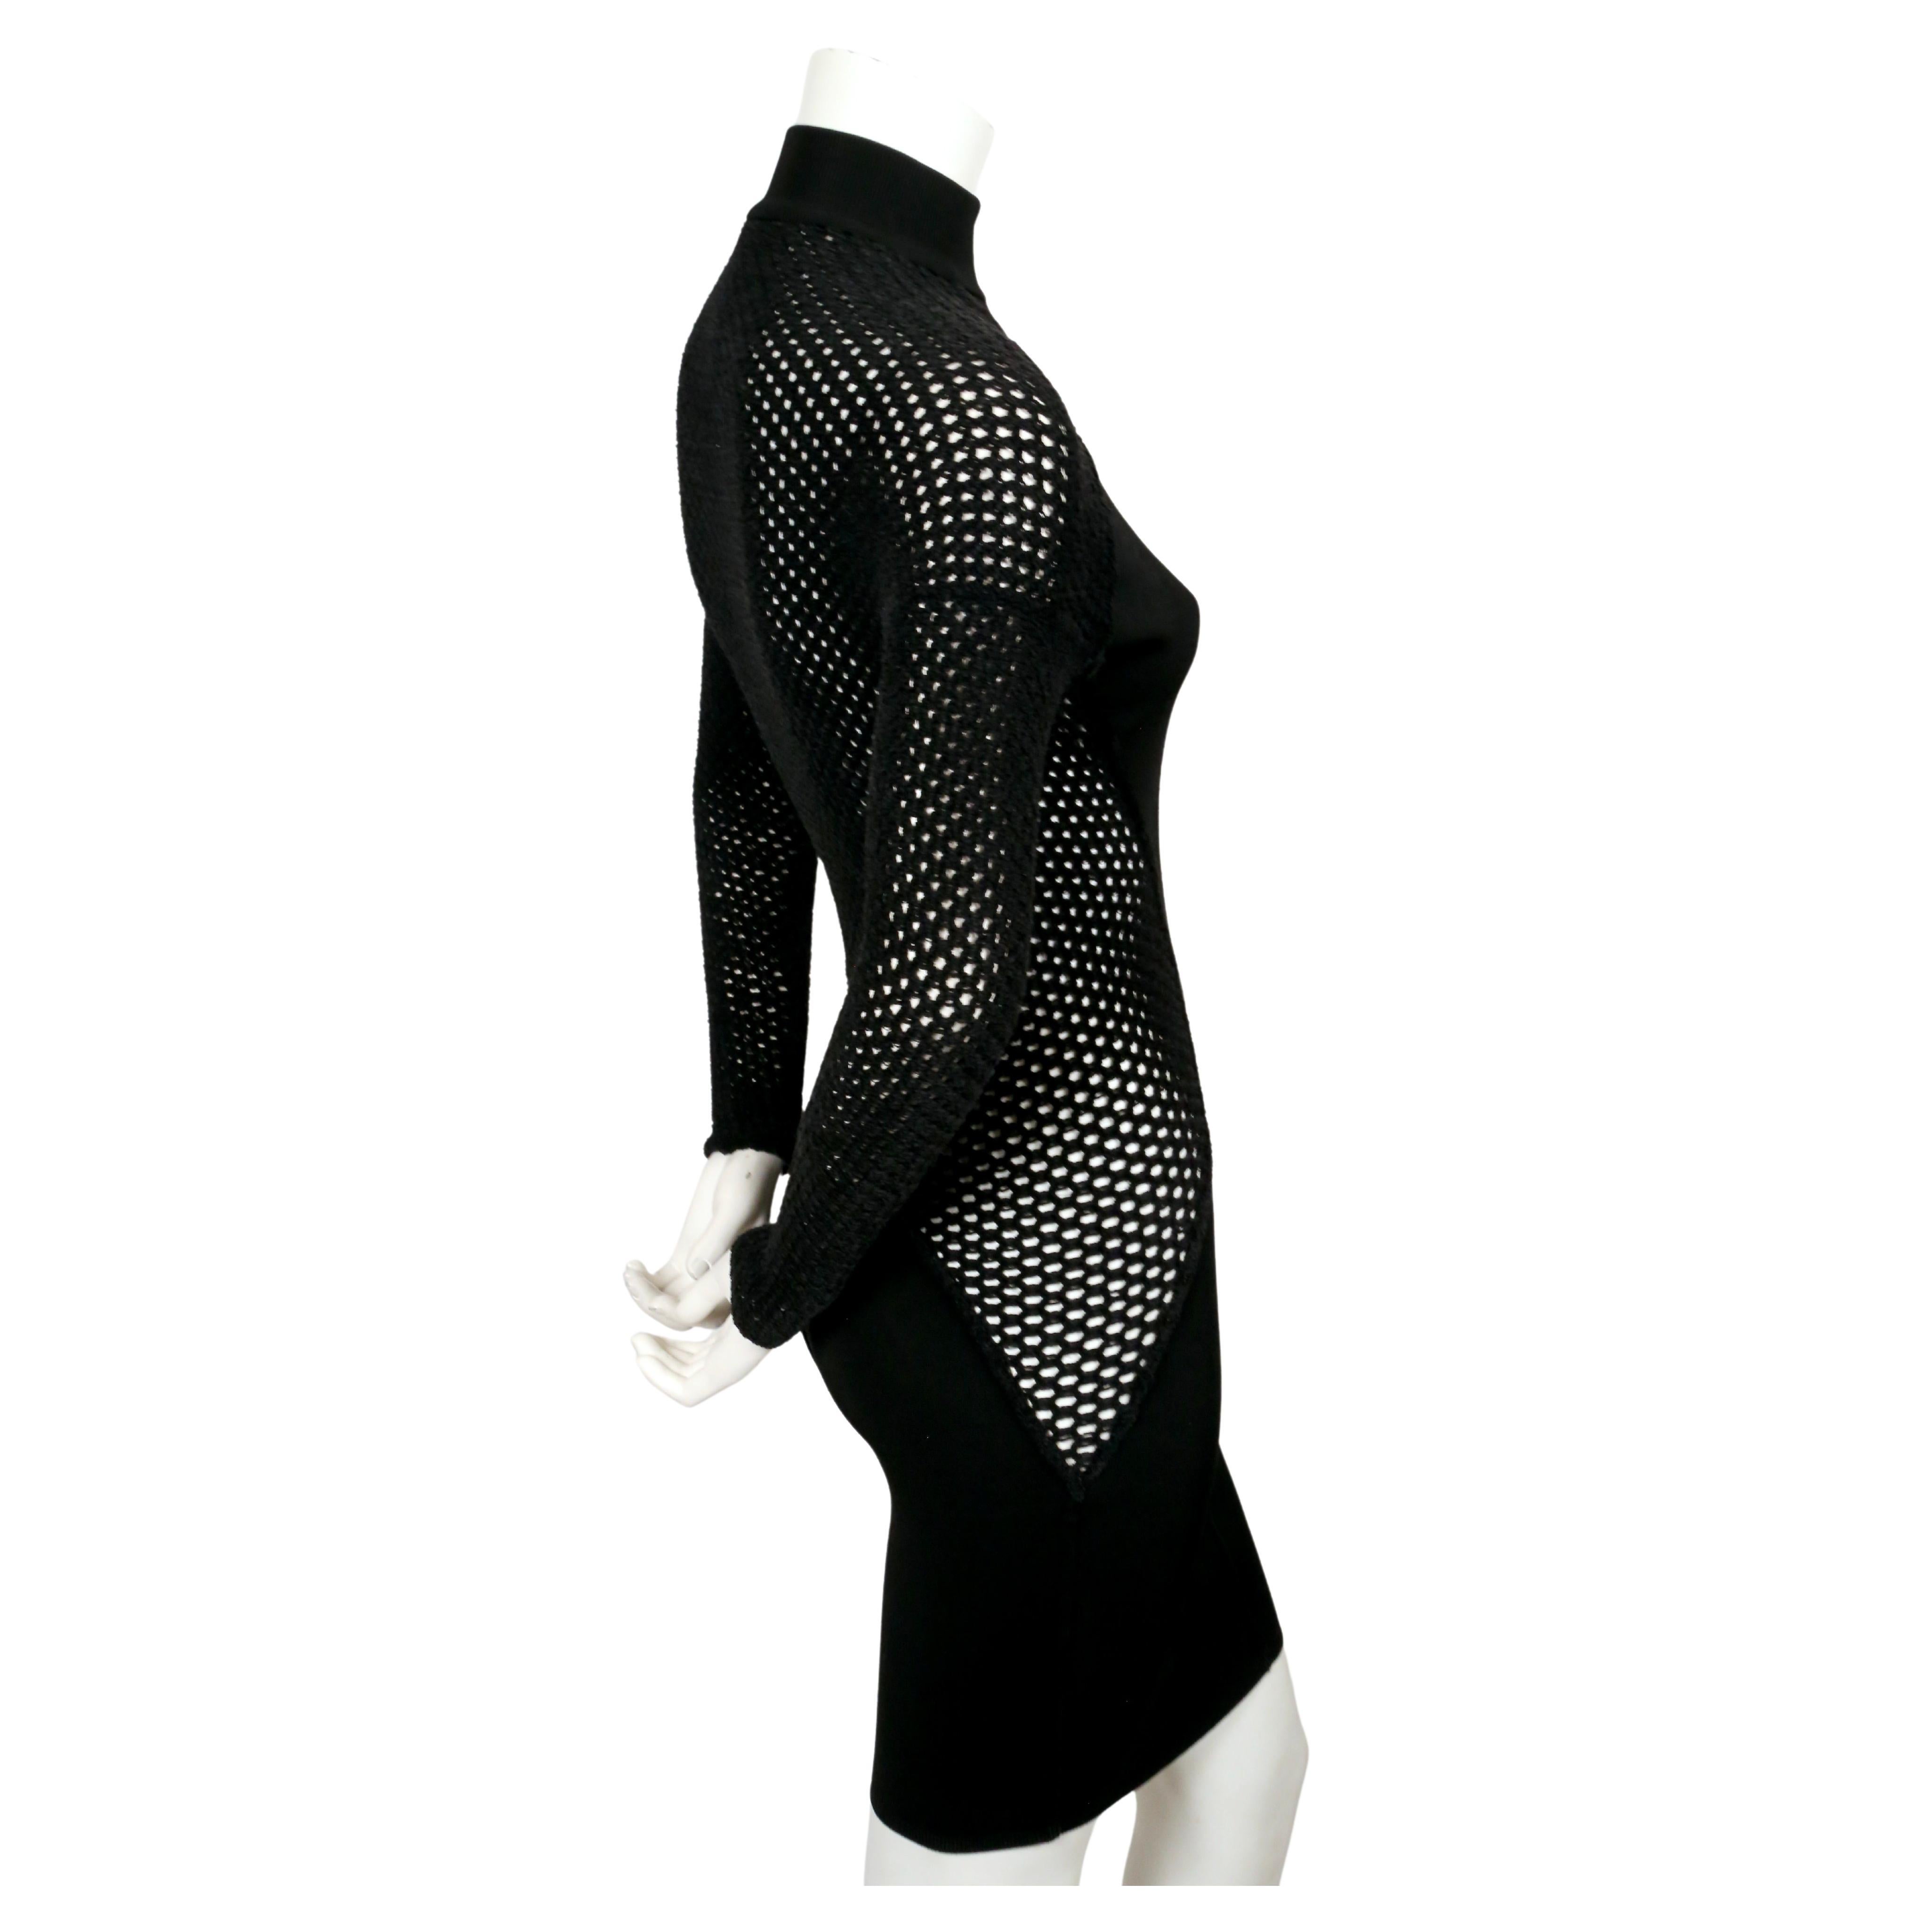 1989 AZZEDINE ALAIA black RUNWAY dress with sheer chenille panels For Sale 2